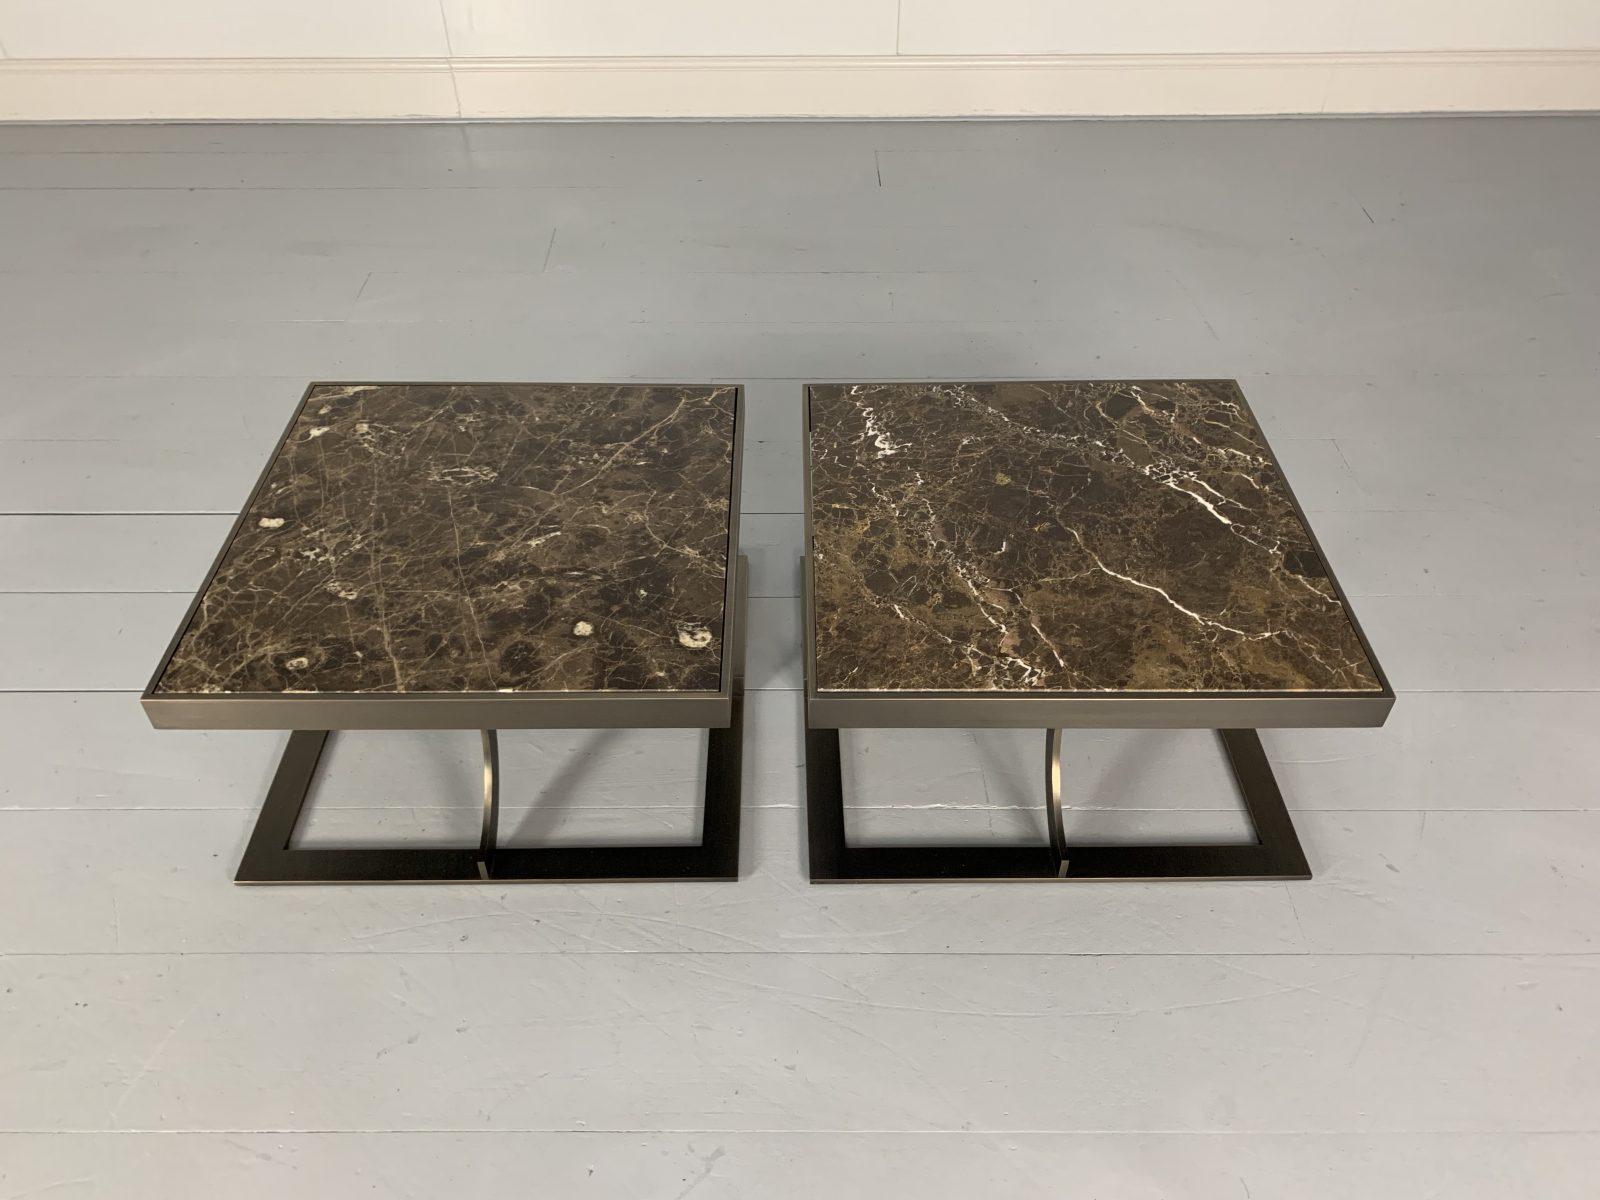 This is a spectacular, rare identical pair of “Paul” sofa/side/coffee tables from the world renown Italian furniture house of Baxter, with a laser-cut, burnished-bronze metal frame, and topped with spellbinding “Emperador” marble.

In a world of